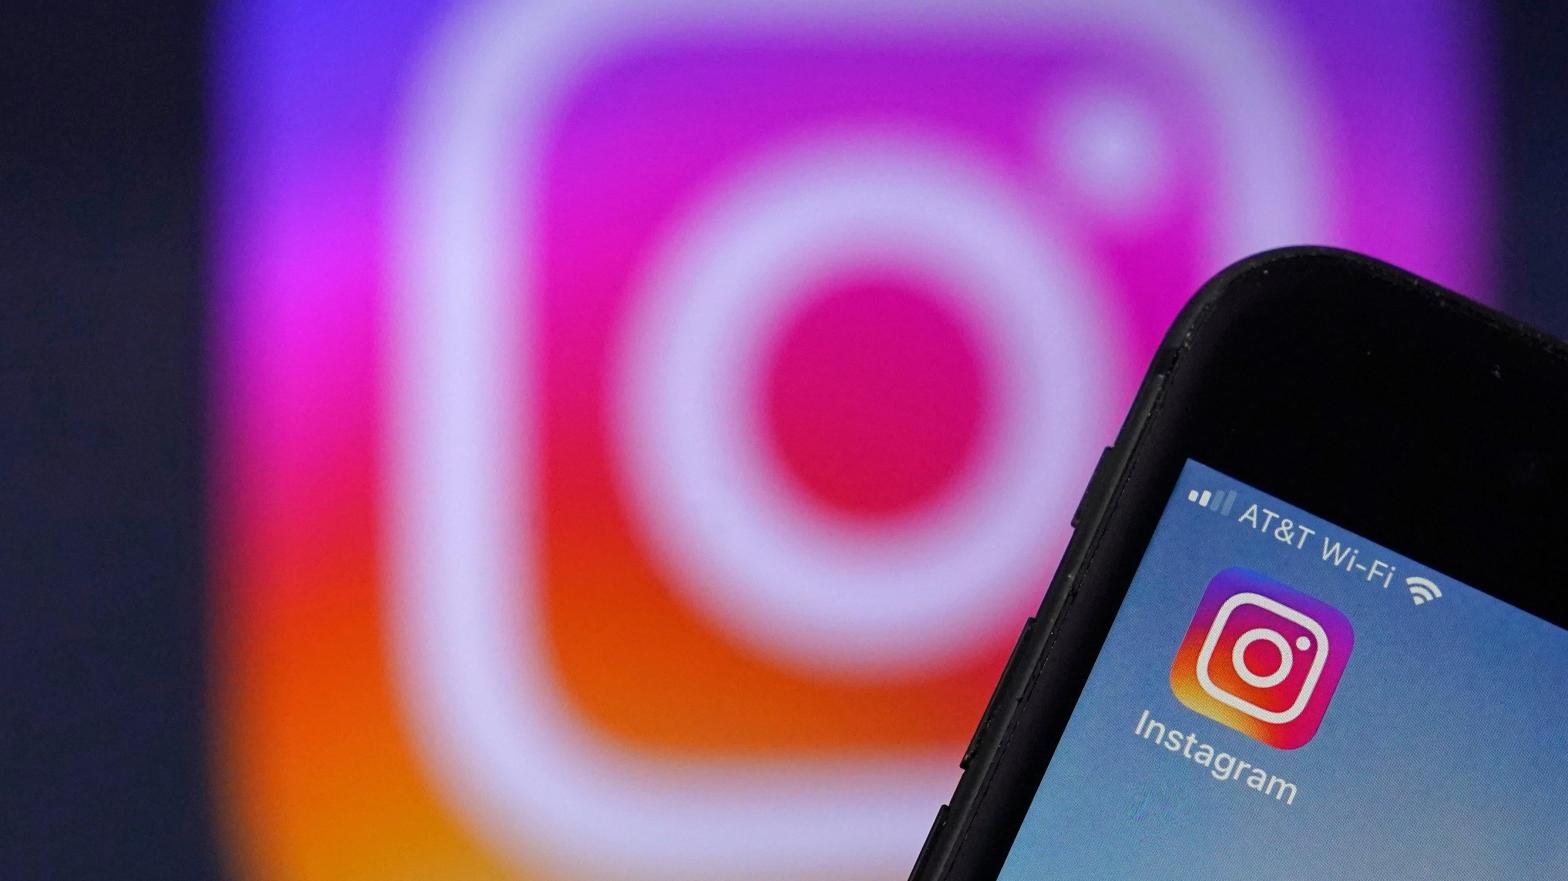 In response to user fury, Instagram will pause its full-screen test and reduce the number of recommendations it shows users. (Photo: Charles Krupa, AP)